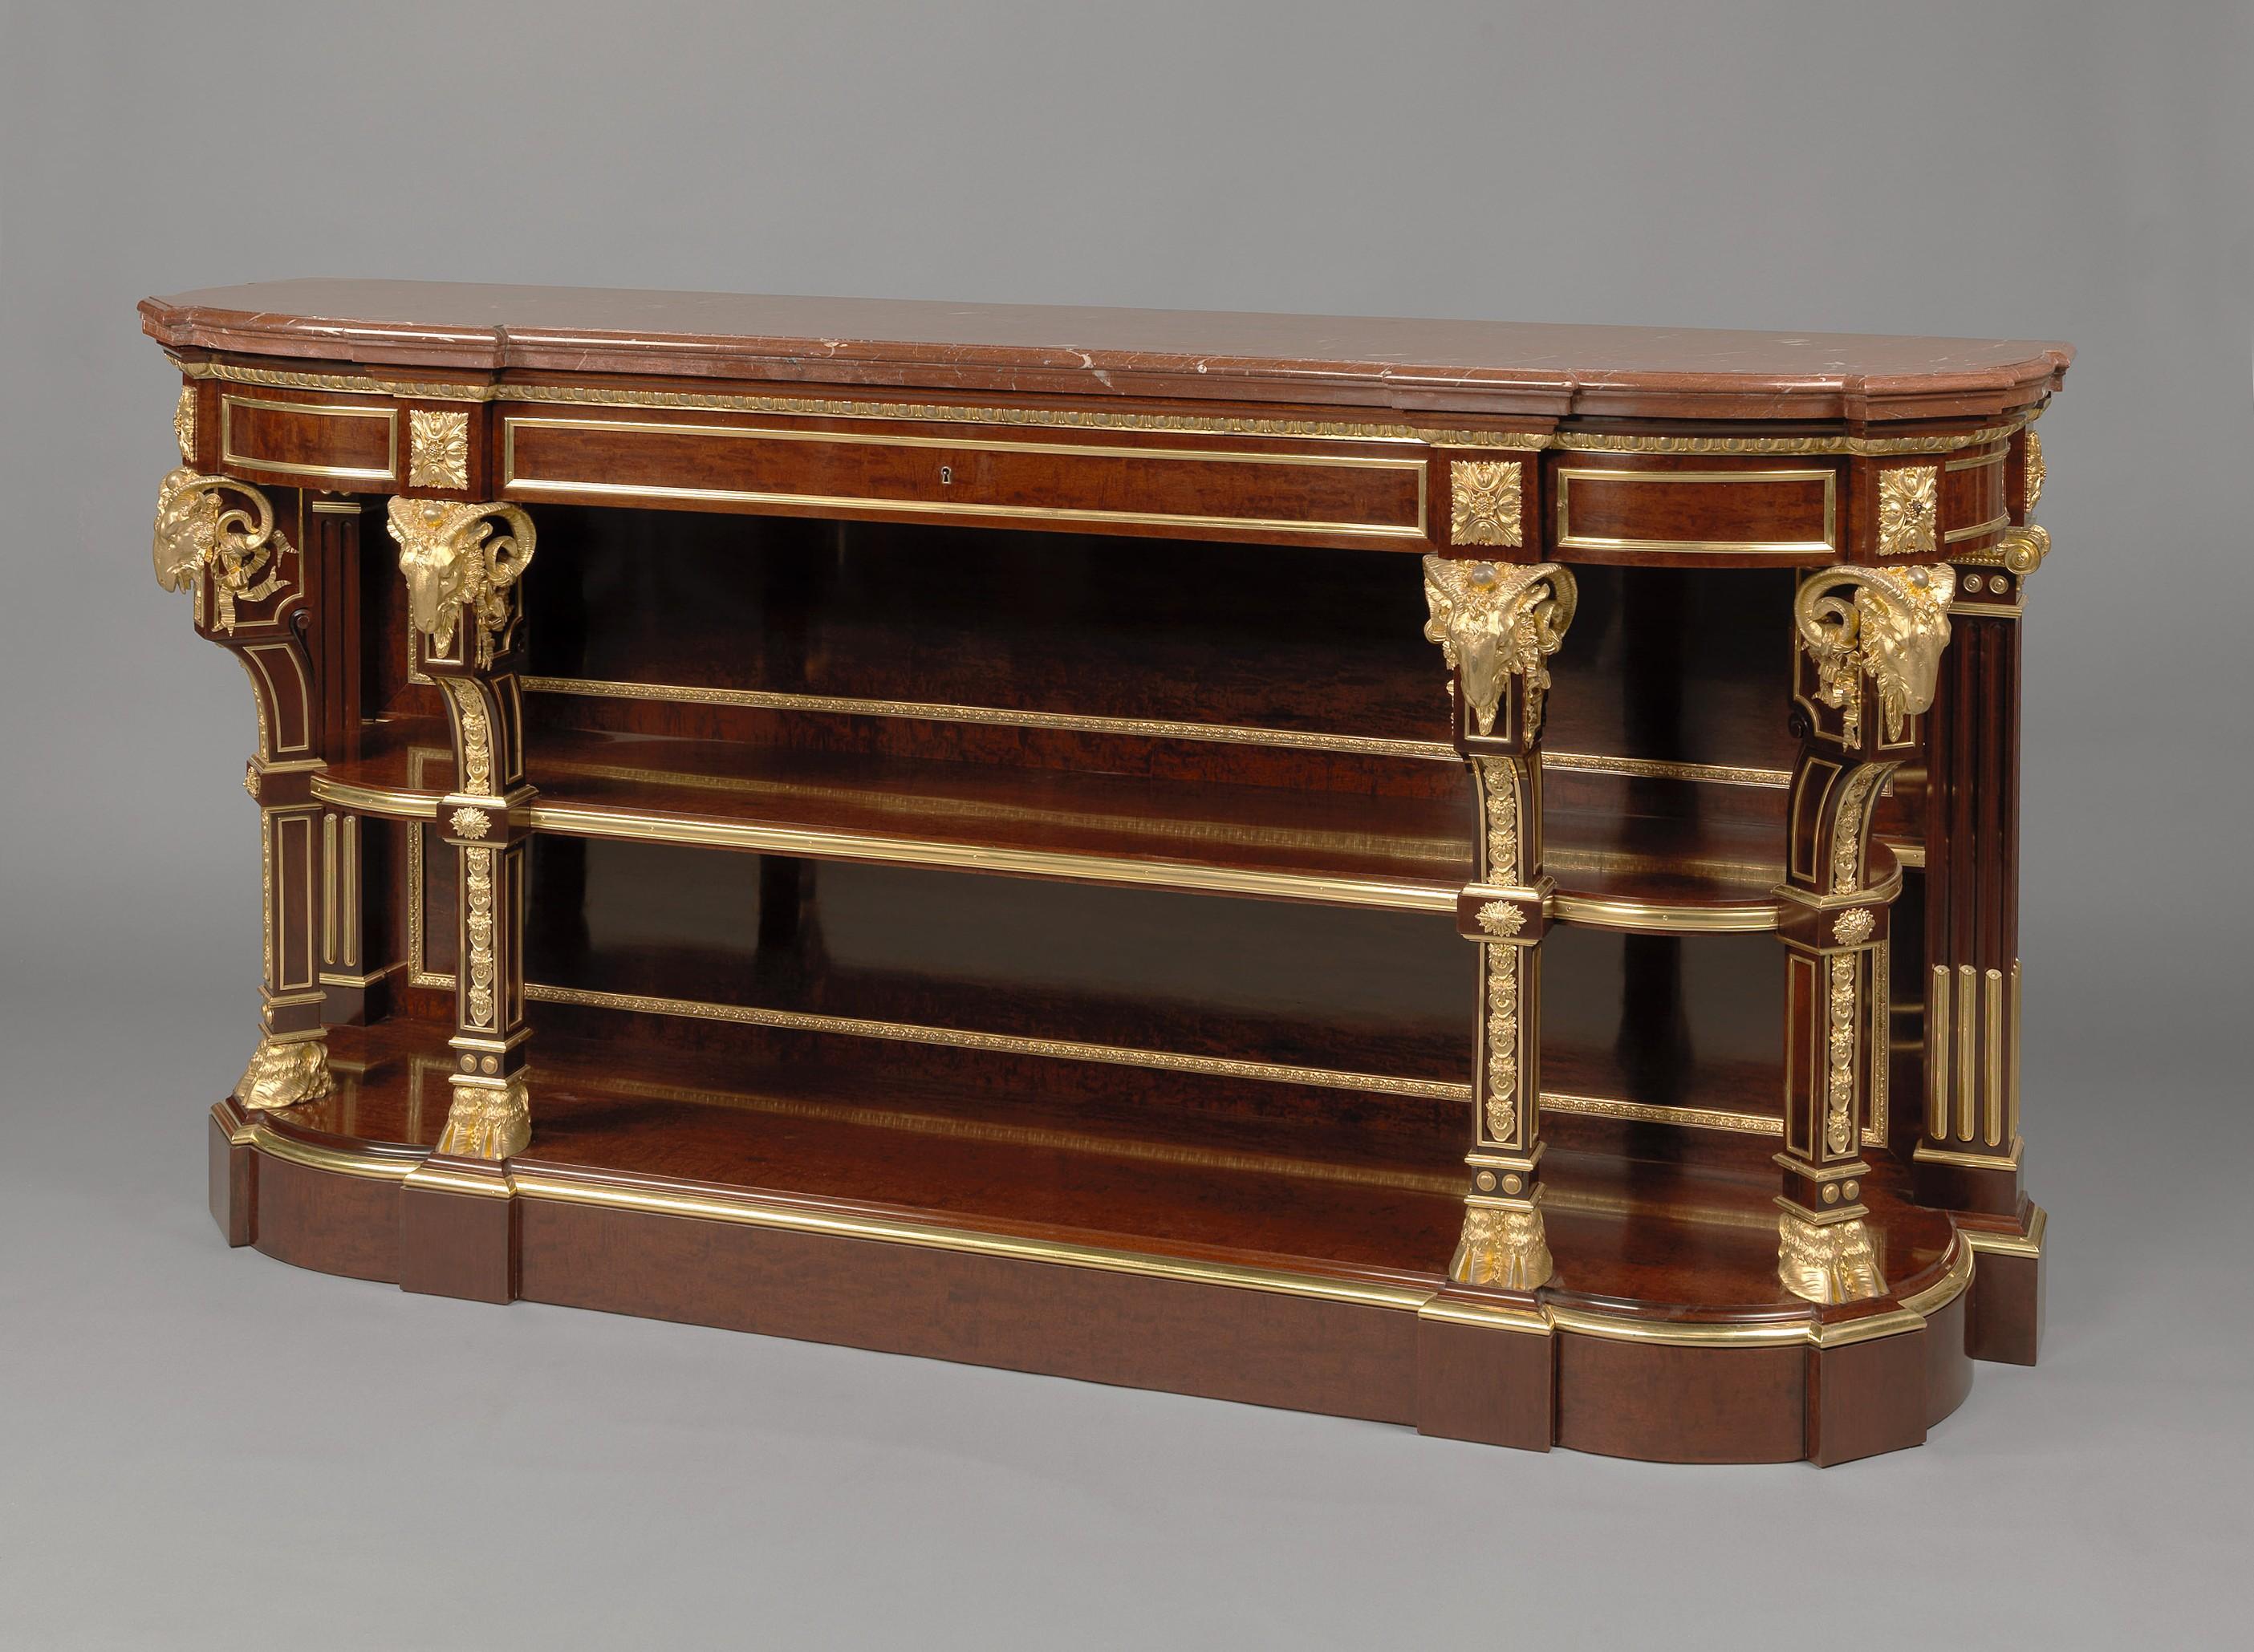 French Napoléon III Gilt-Bronze Mounted Mahogany Buffet by Maison Grohé, circa 1860 For Sale